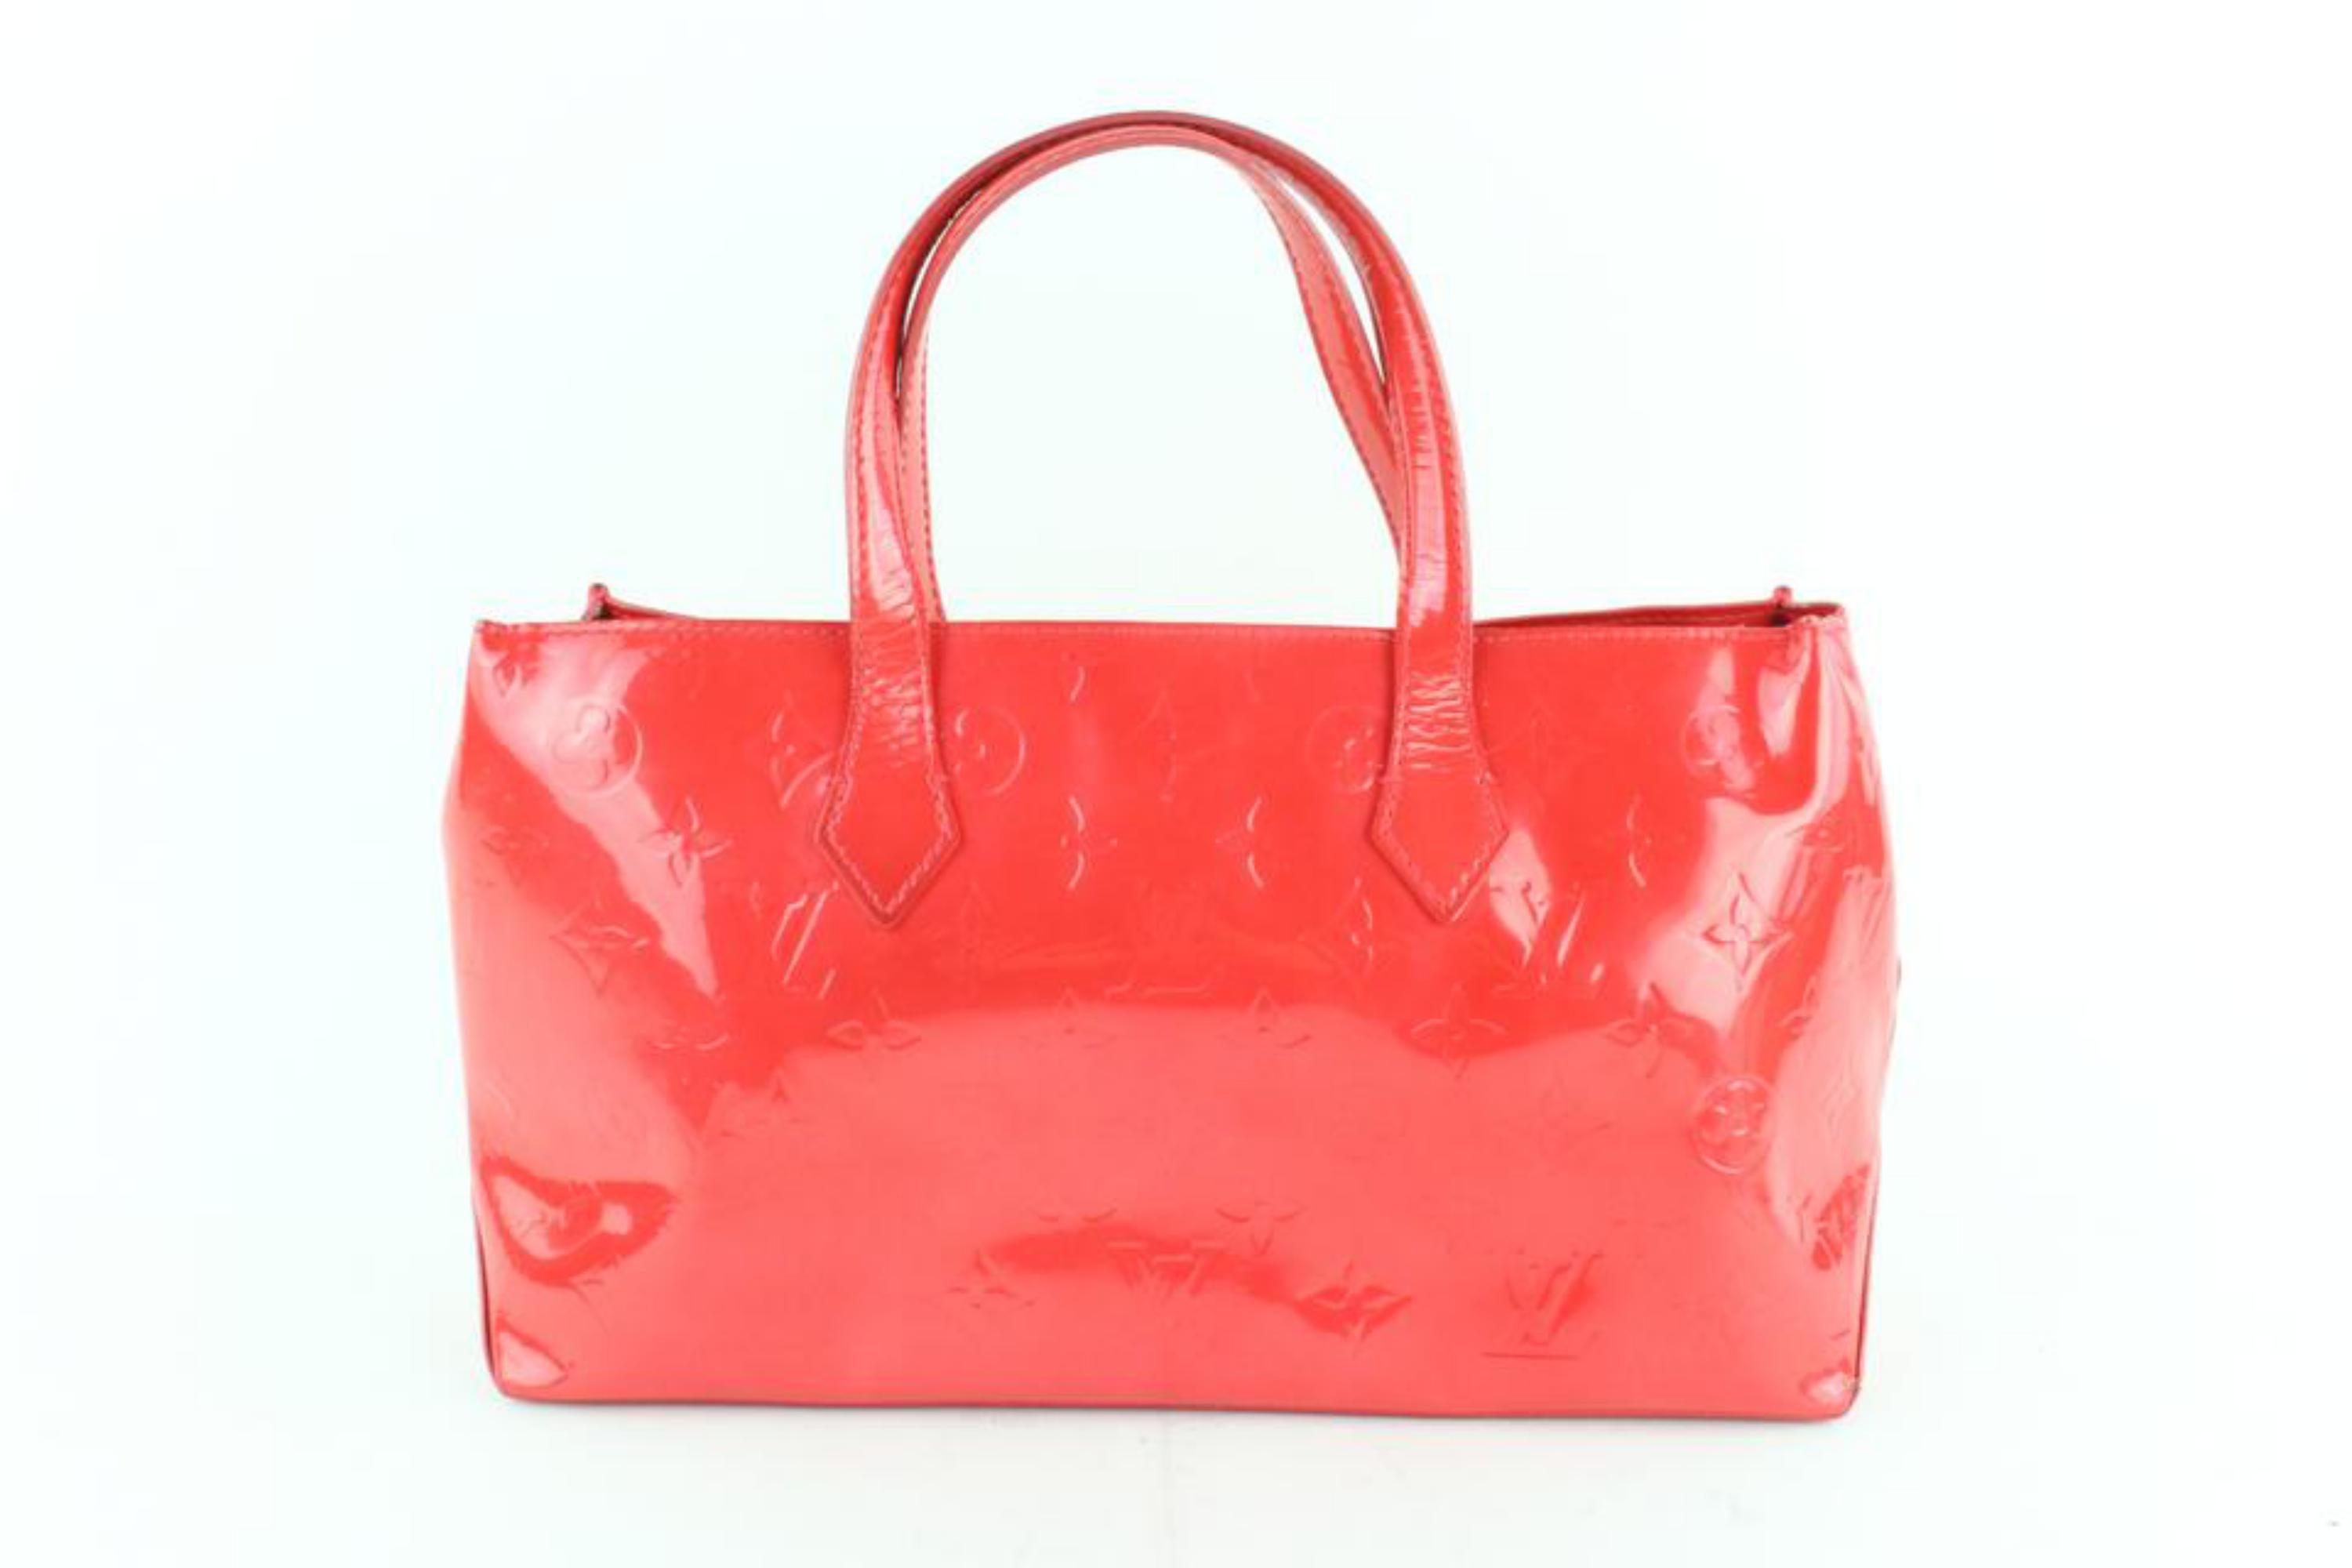 Louis Vuitton Wilshire Monogram Vernis Pm 231159 Red Patent Leather Tote For Sale 7